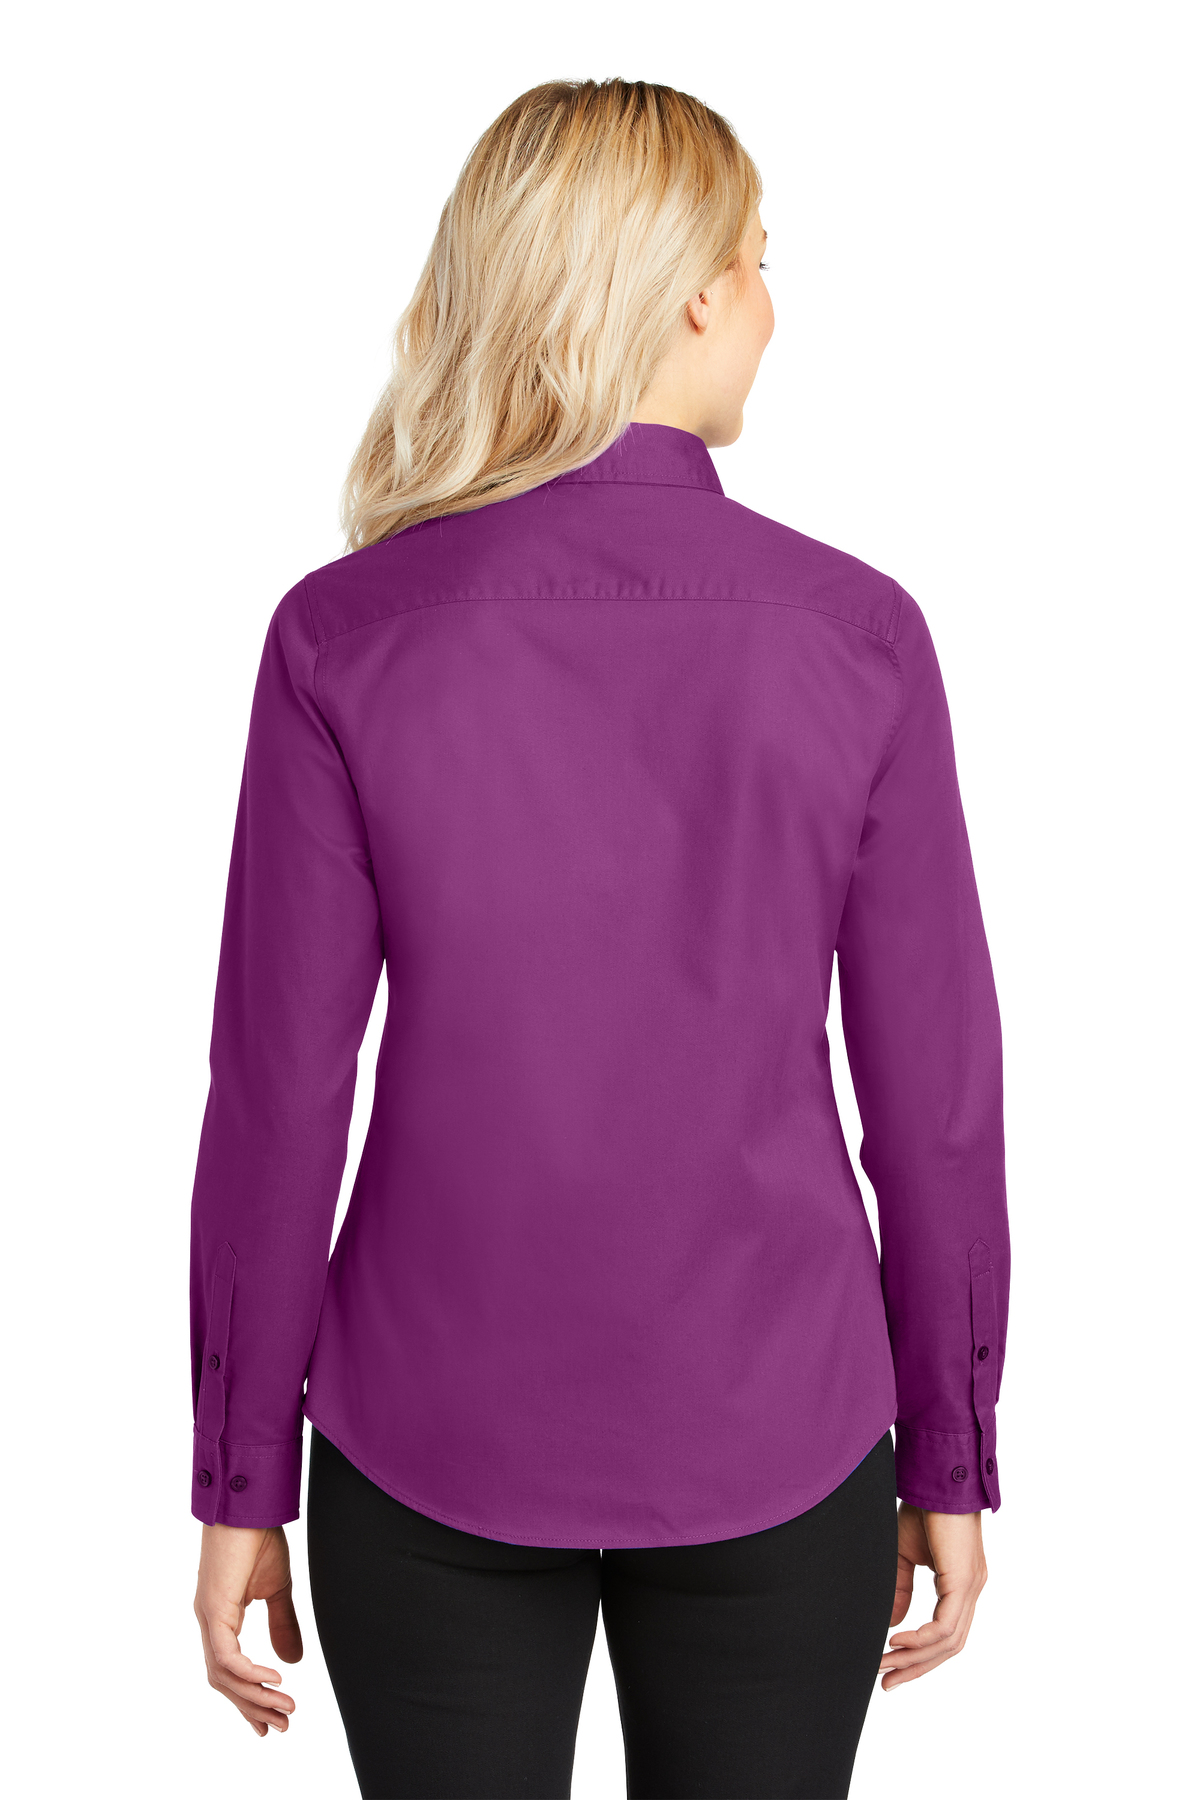 Sleeve Easy Authority Care | Authority Long Product | Port Port Shirt Ladies